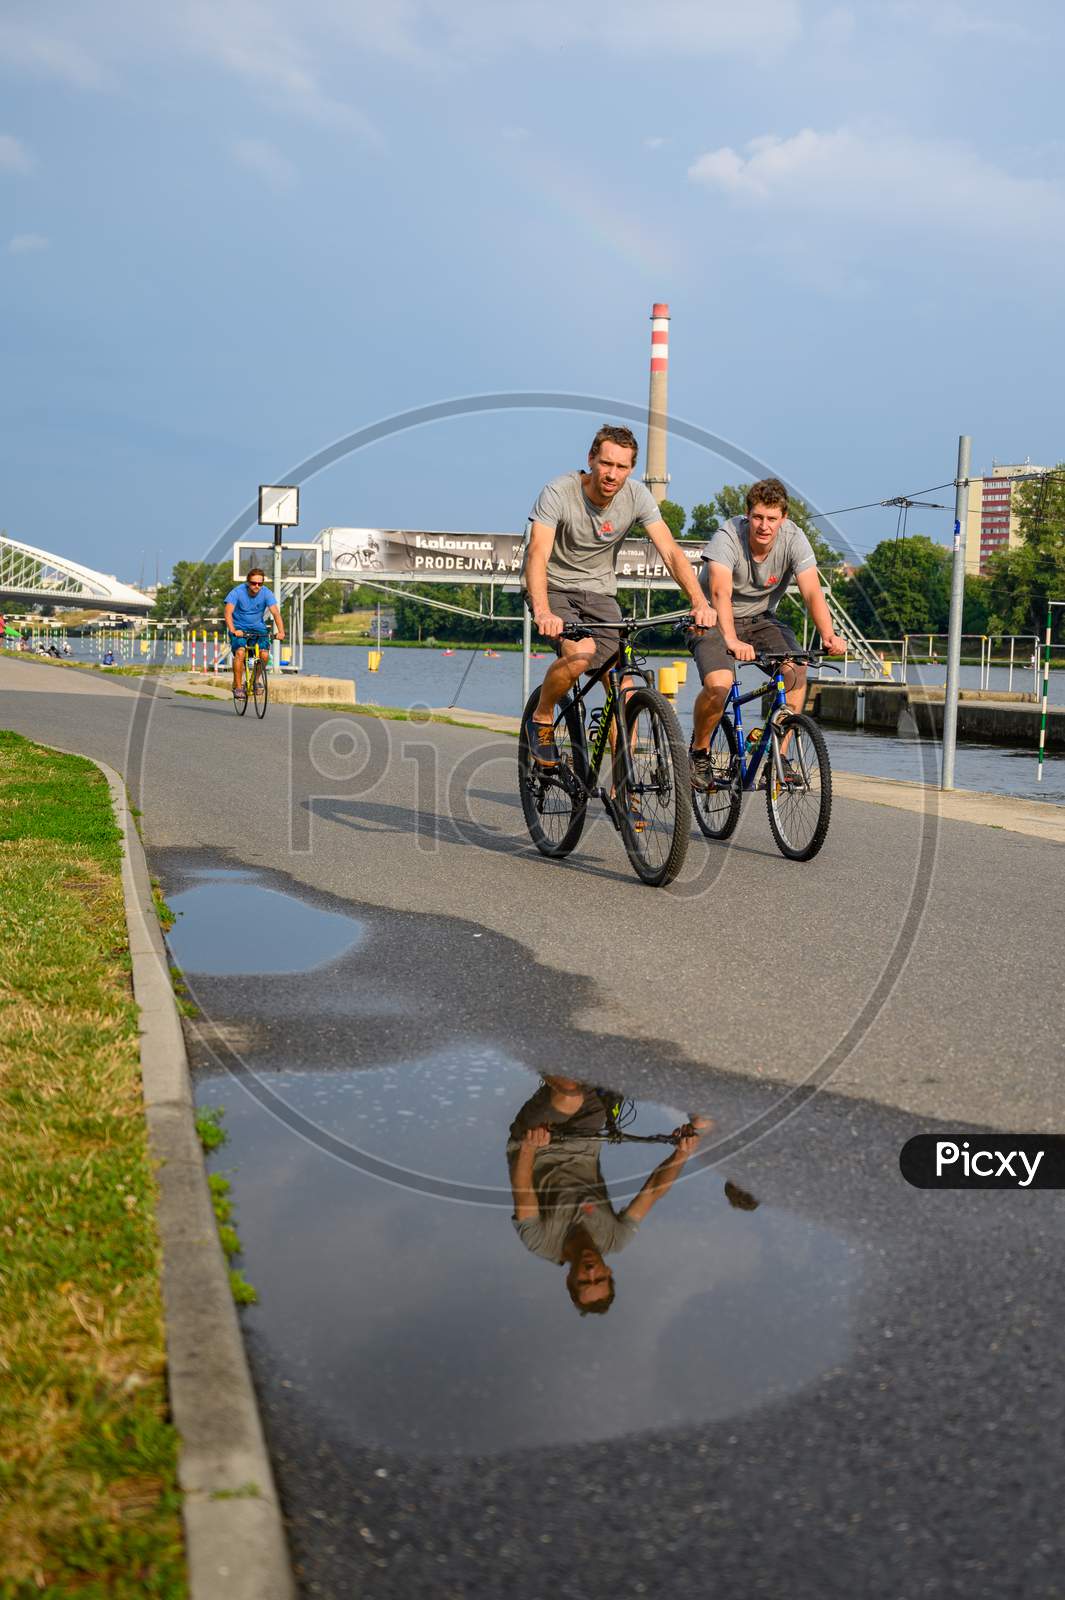 Cyclists On A Riverside Path With Reflection In Water Puddle